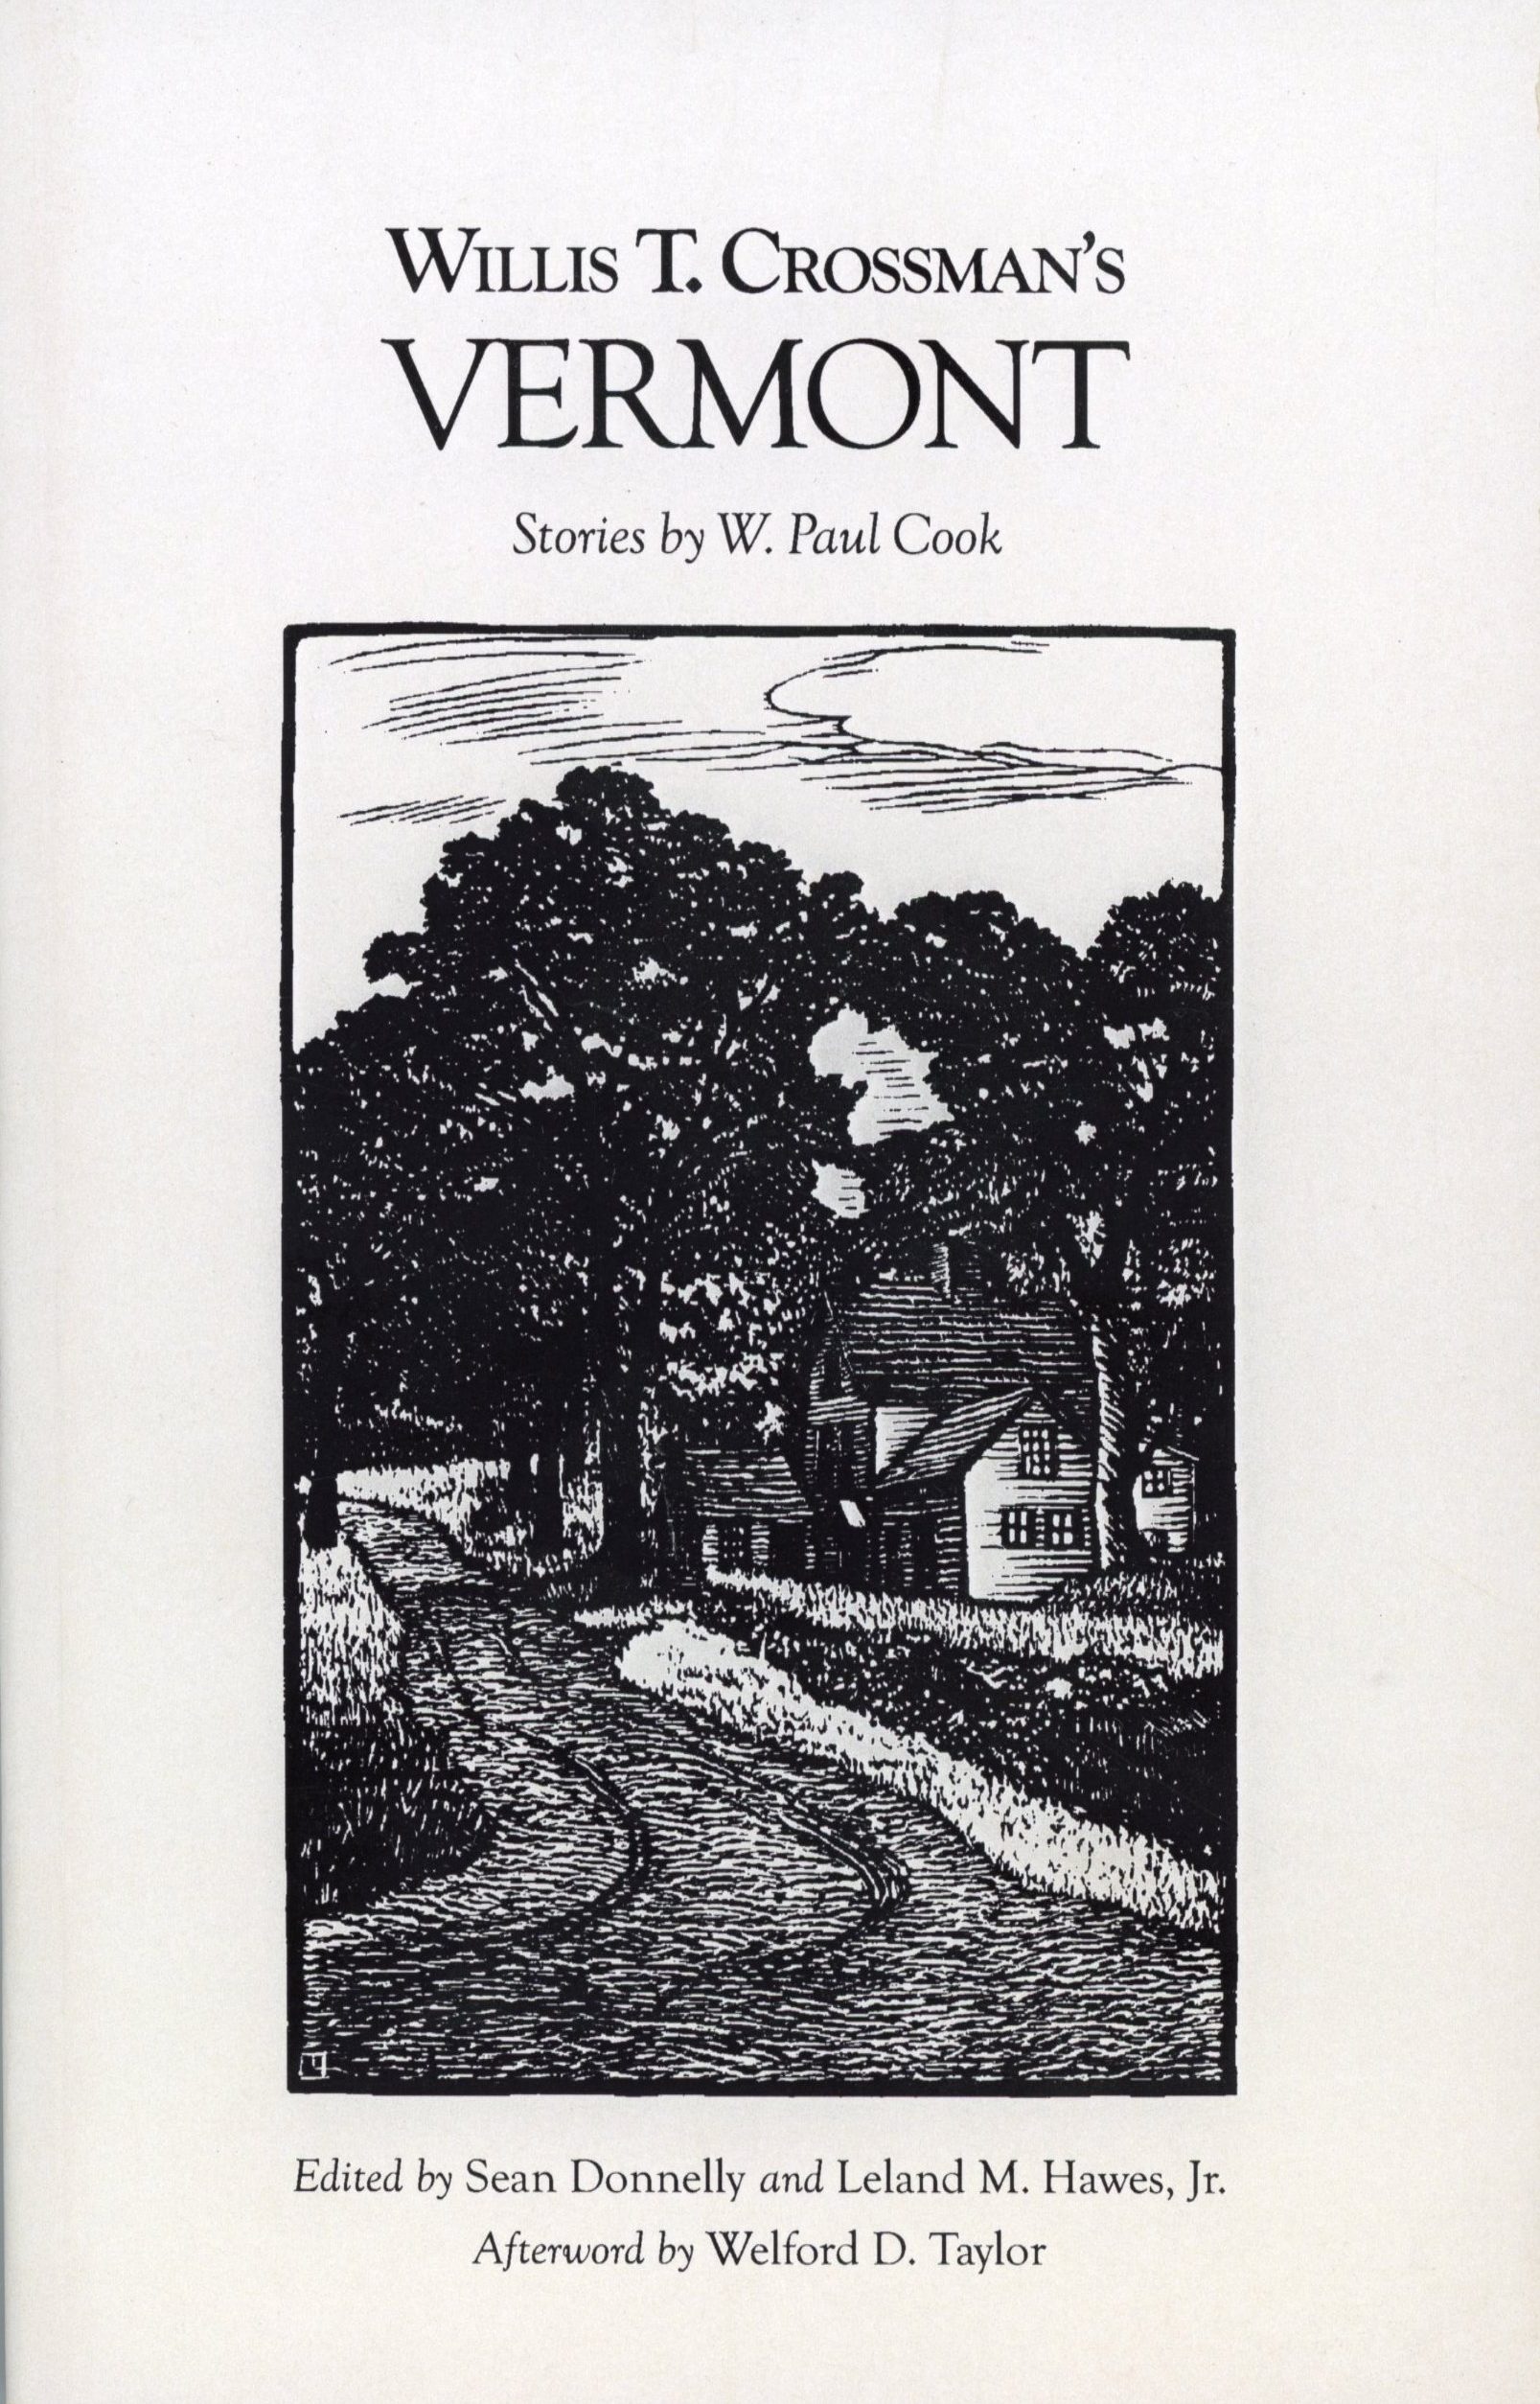 Image of the front cover of Willis T. Crossman's Vermont.